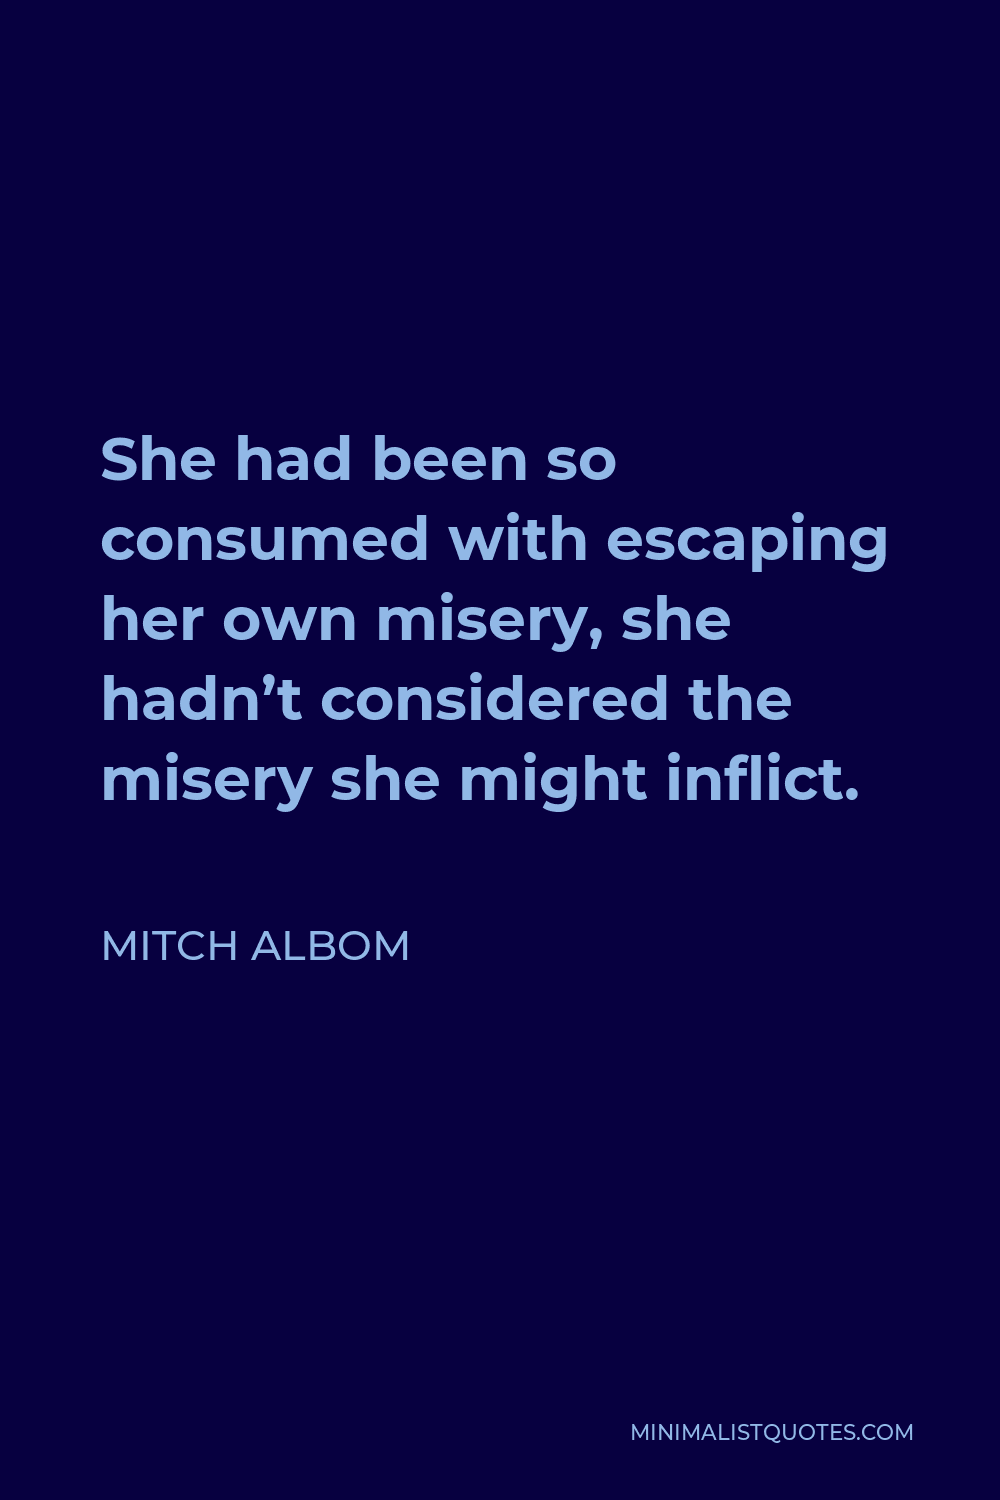 Mitch Albom Quote - She had been so consumed with escaping her own misery, she hadn’t considered the misery she might inflict.